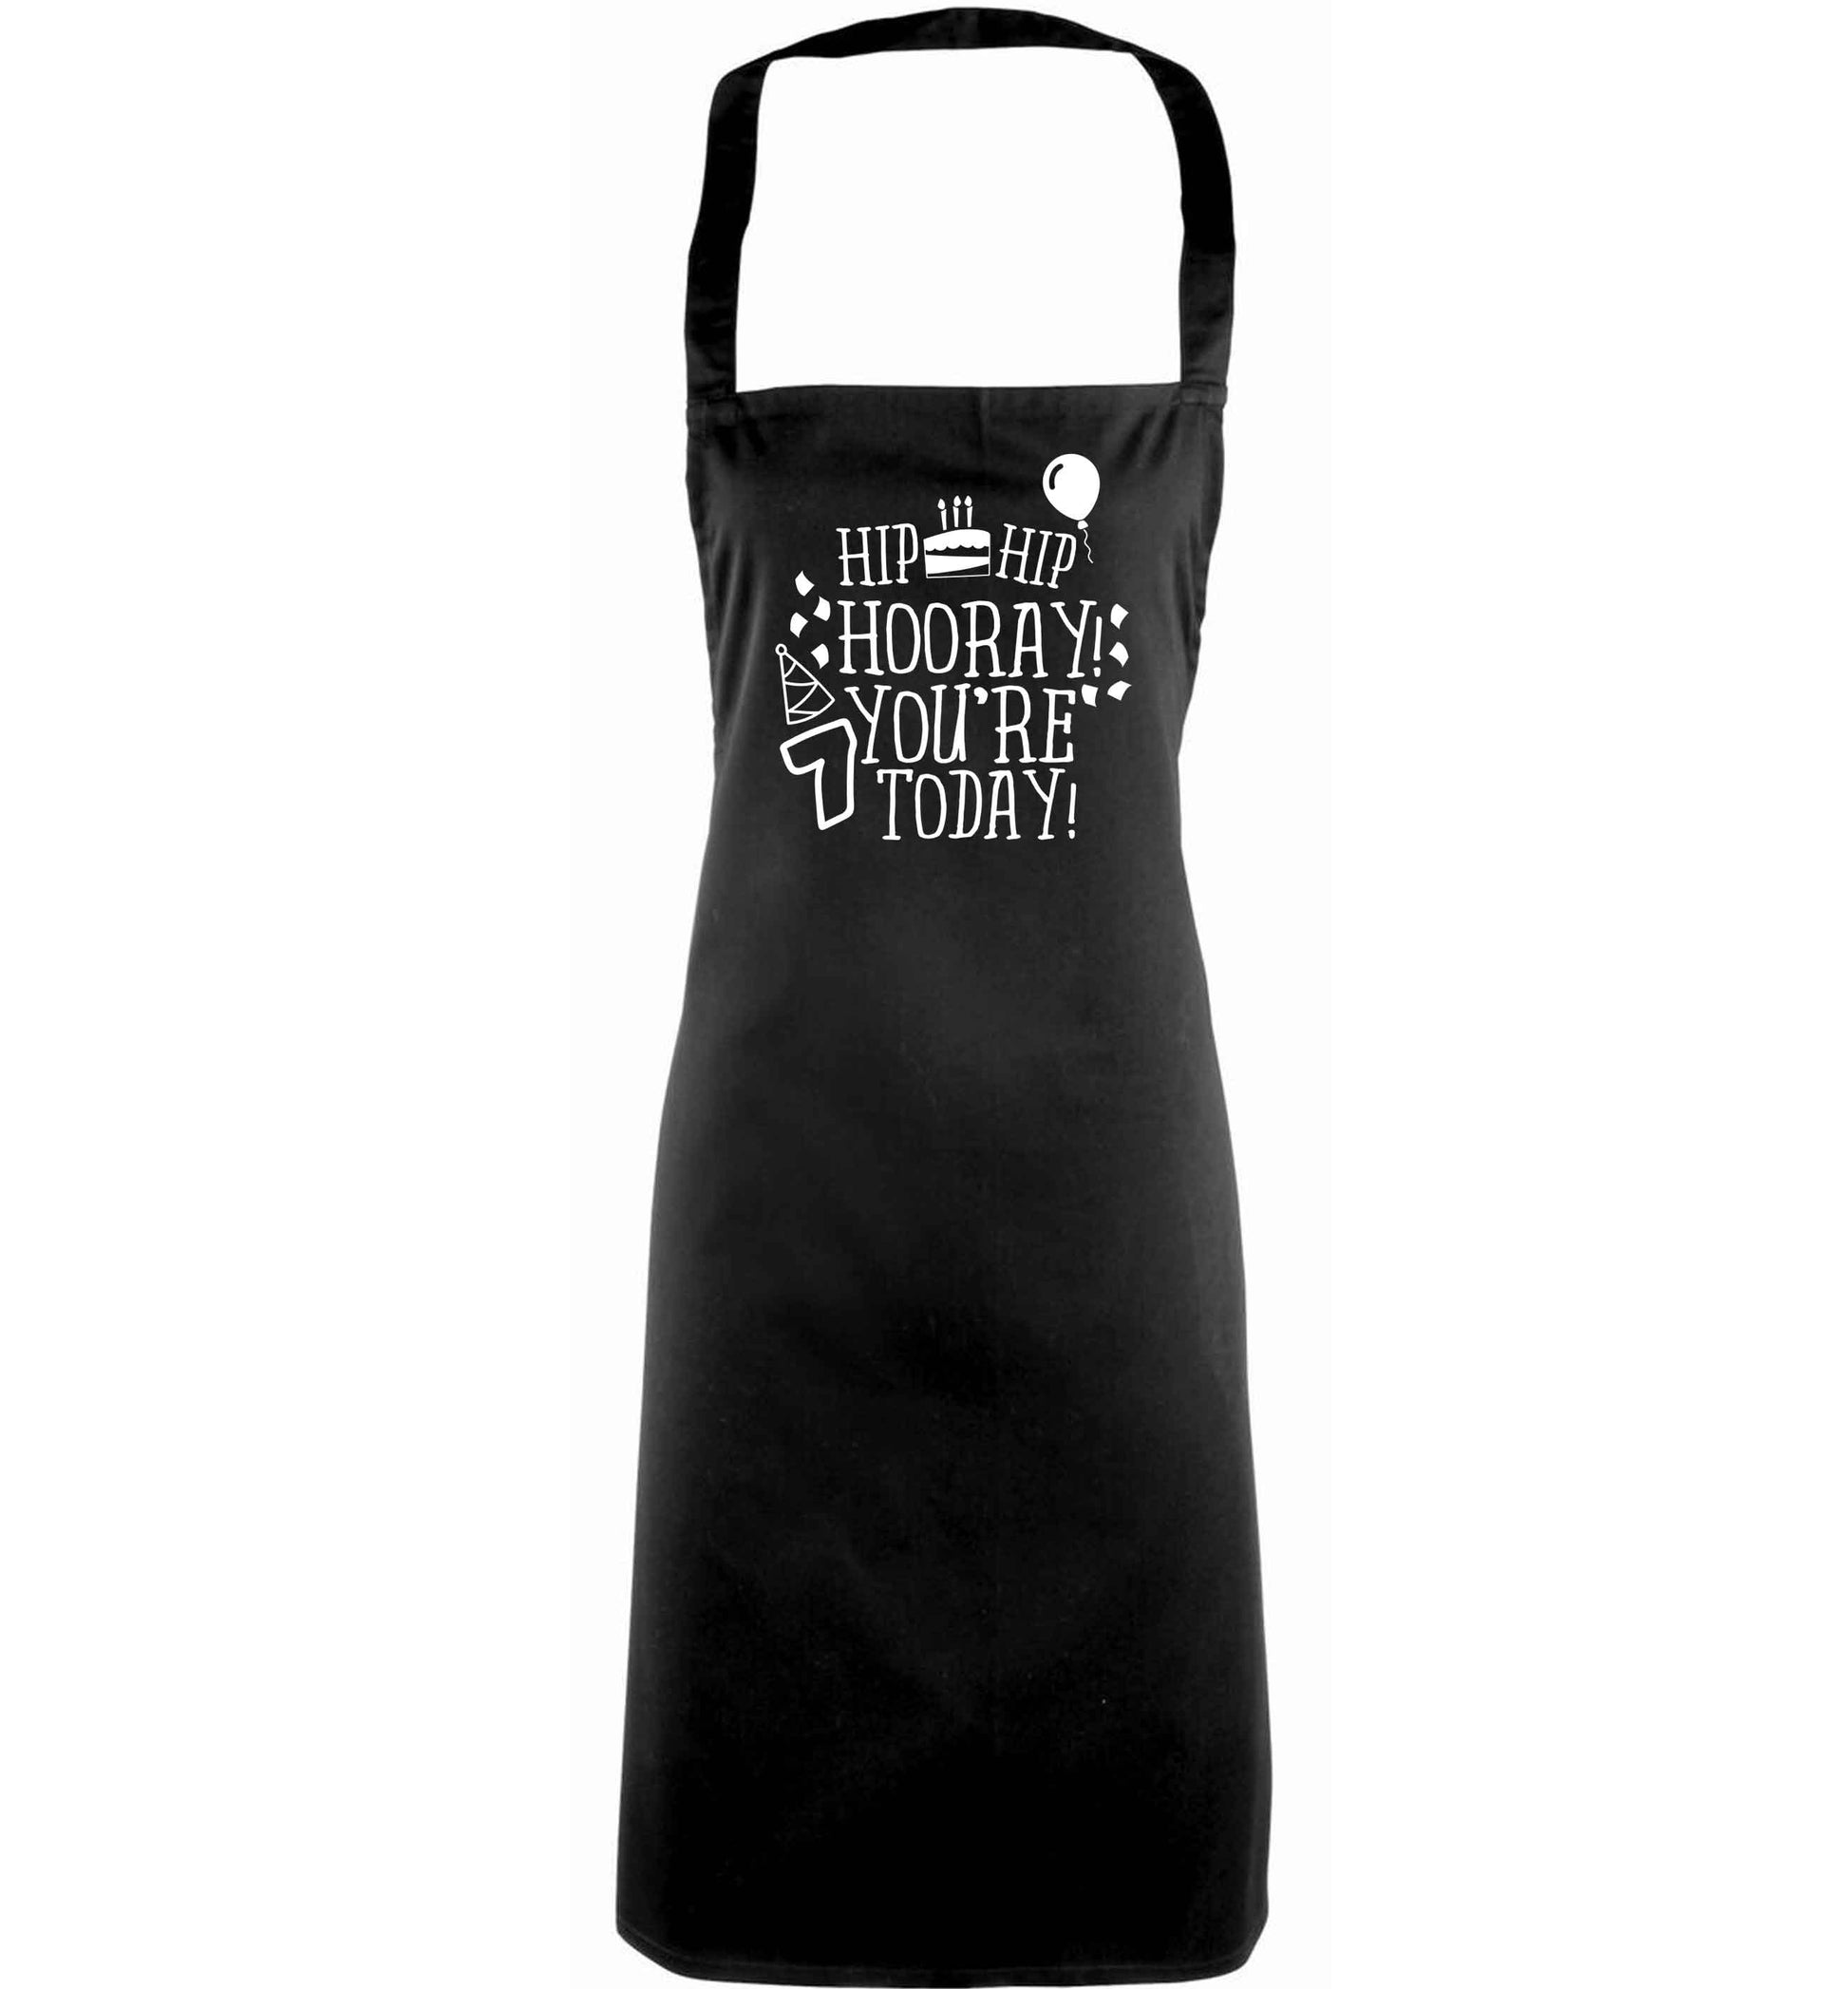 Hip hip hooray you're seven today! adults black apron